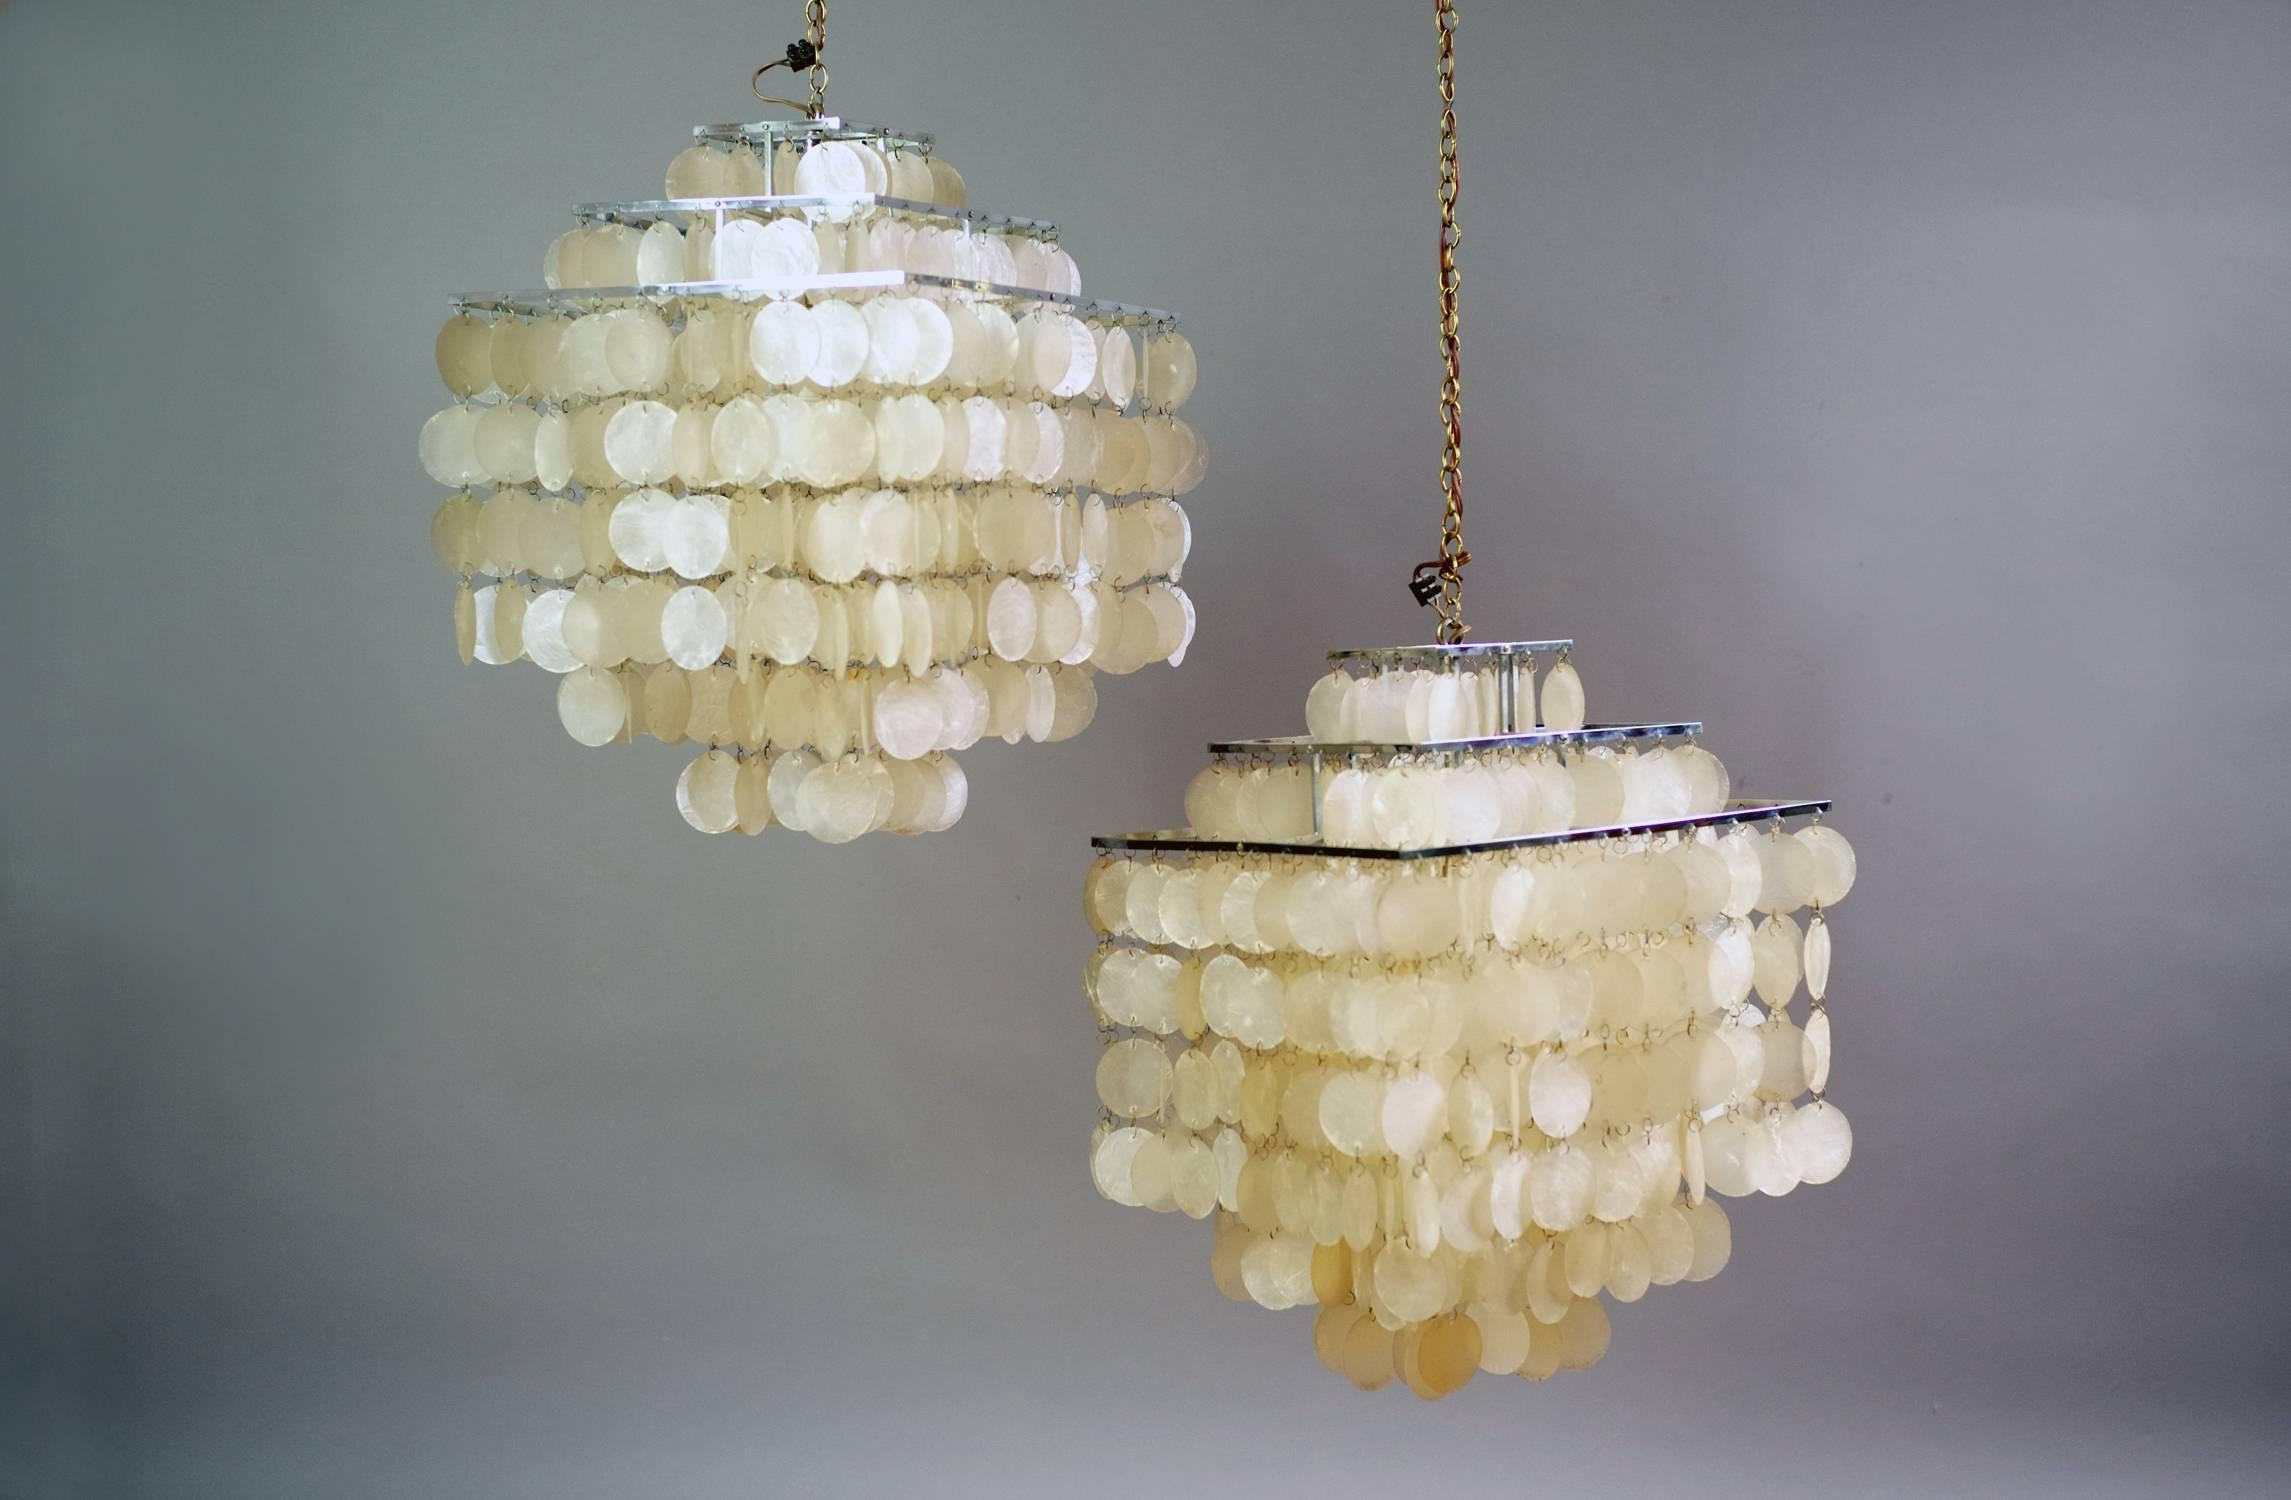 This pair of model Fun pendants was designed by Verner Panton for J. Lüber. They were produced in Switzerland, circa 1964. This model has a quadratic shape made from chromed metal and three tiers of mother-of-pearl discs. The height including the